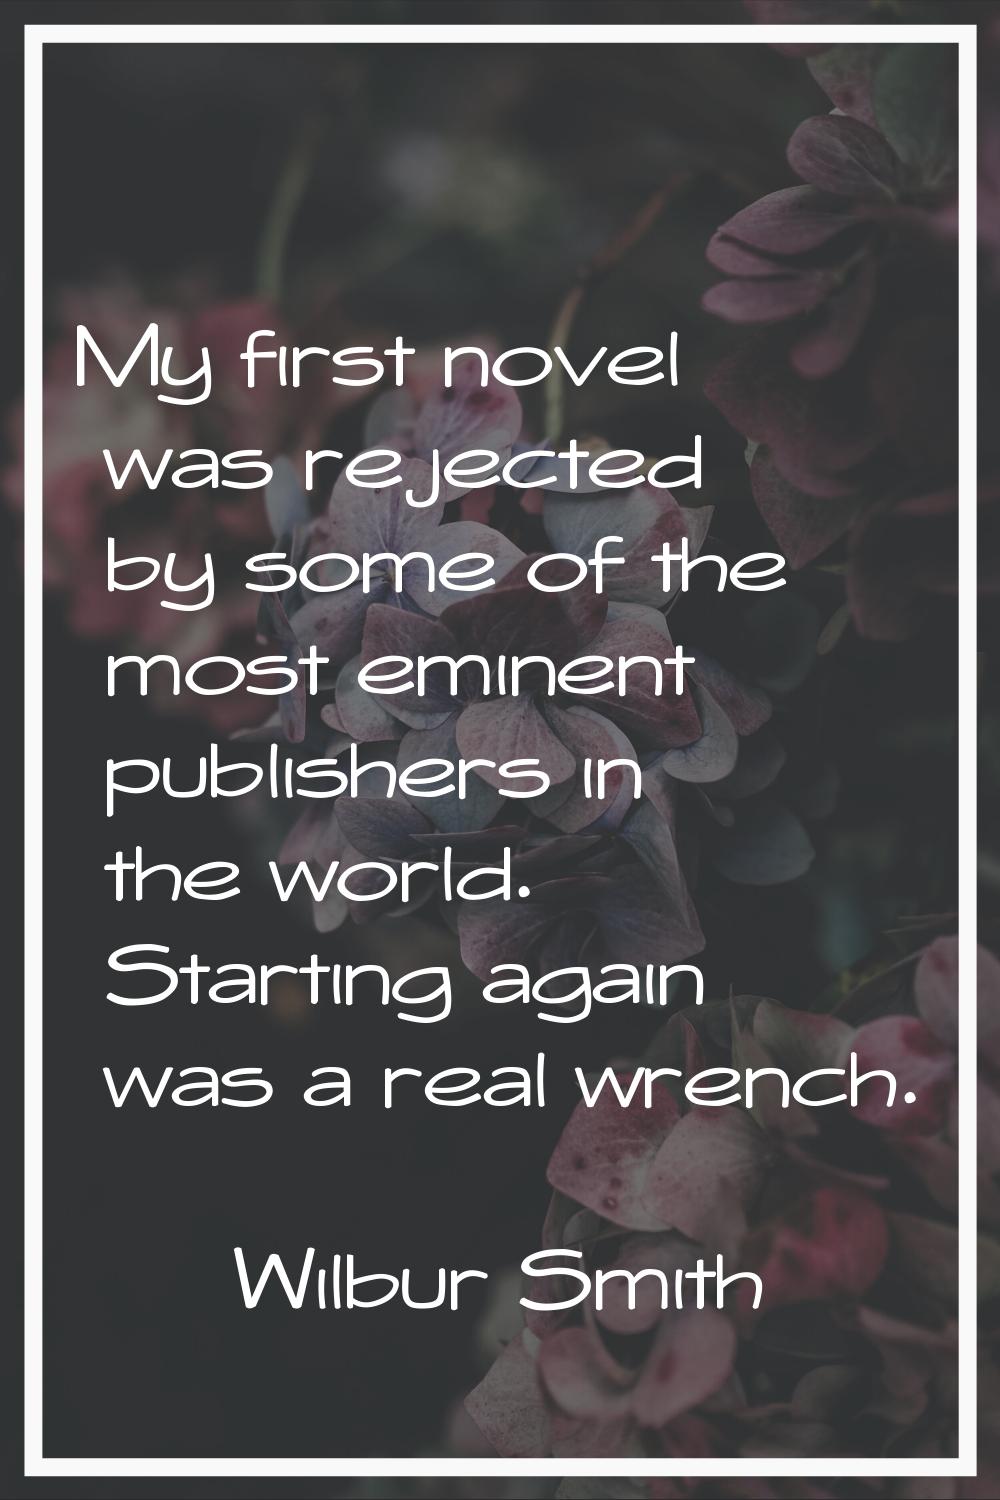 My first novel was rejected by some of the most eminent publishers in the world. Starting again was